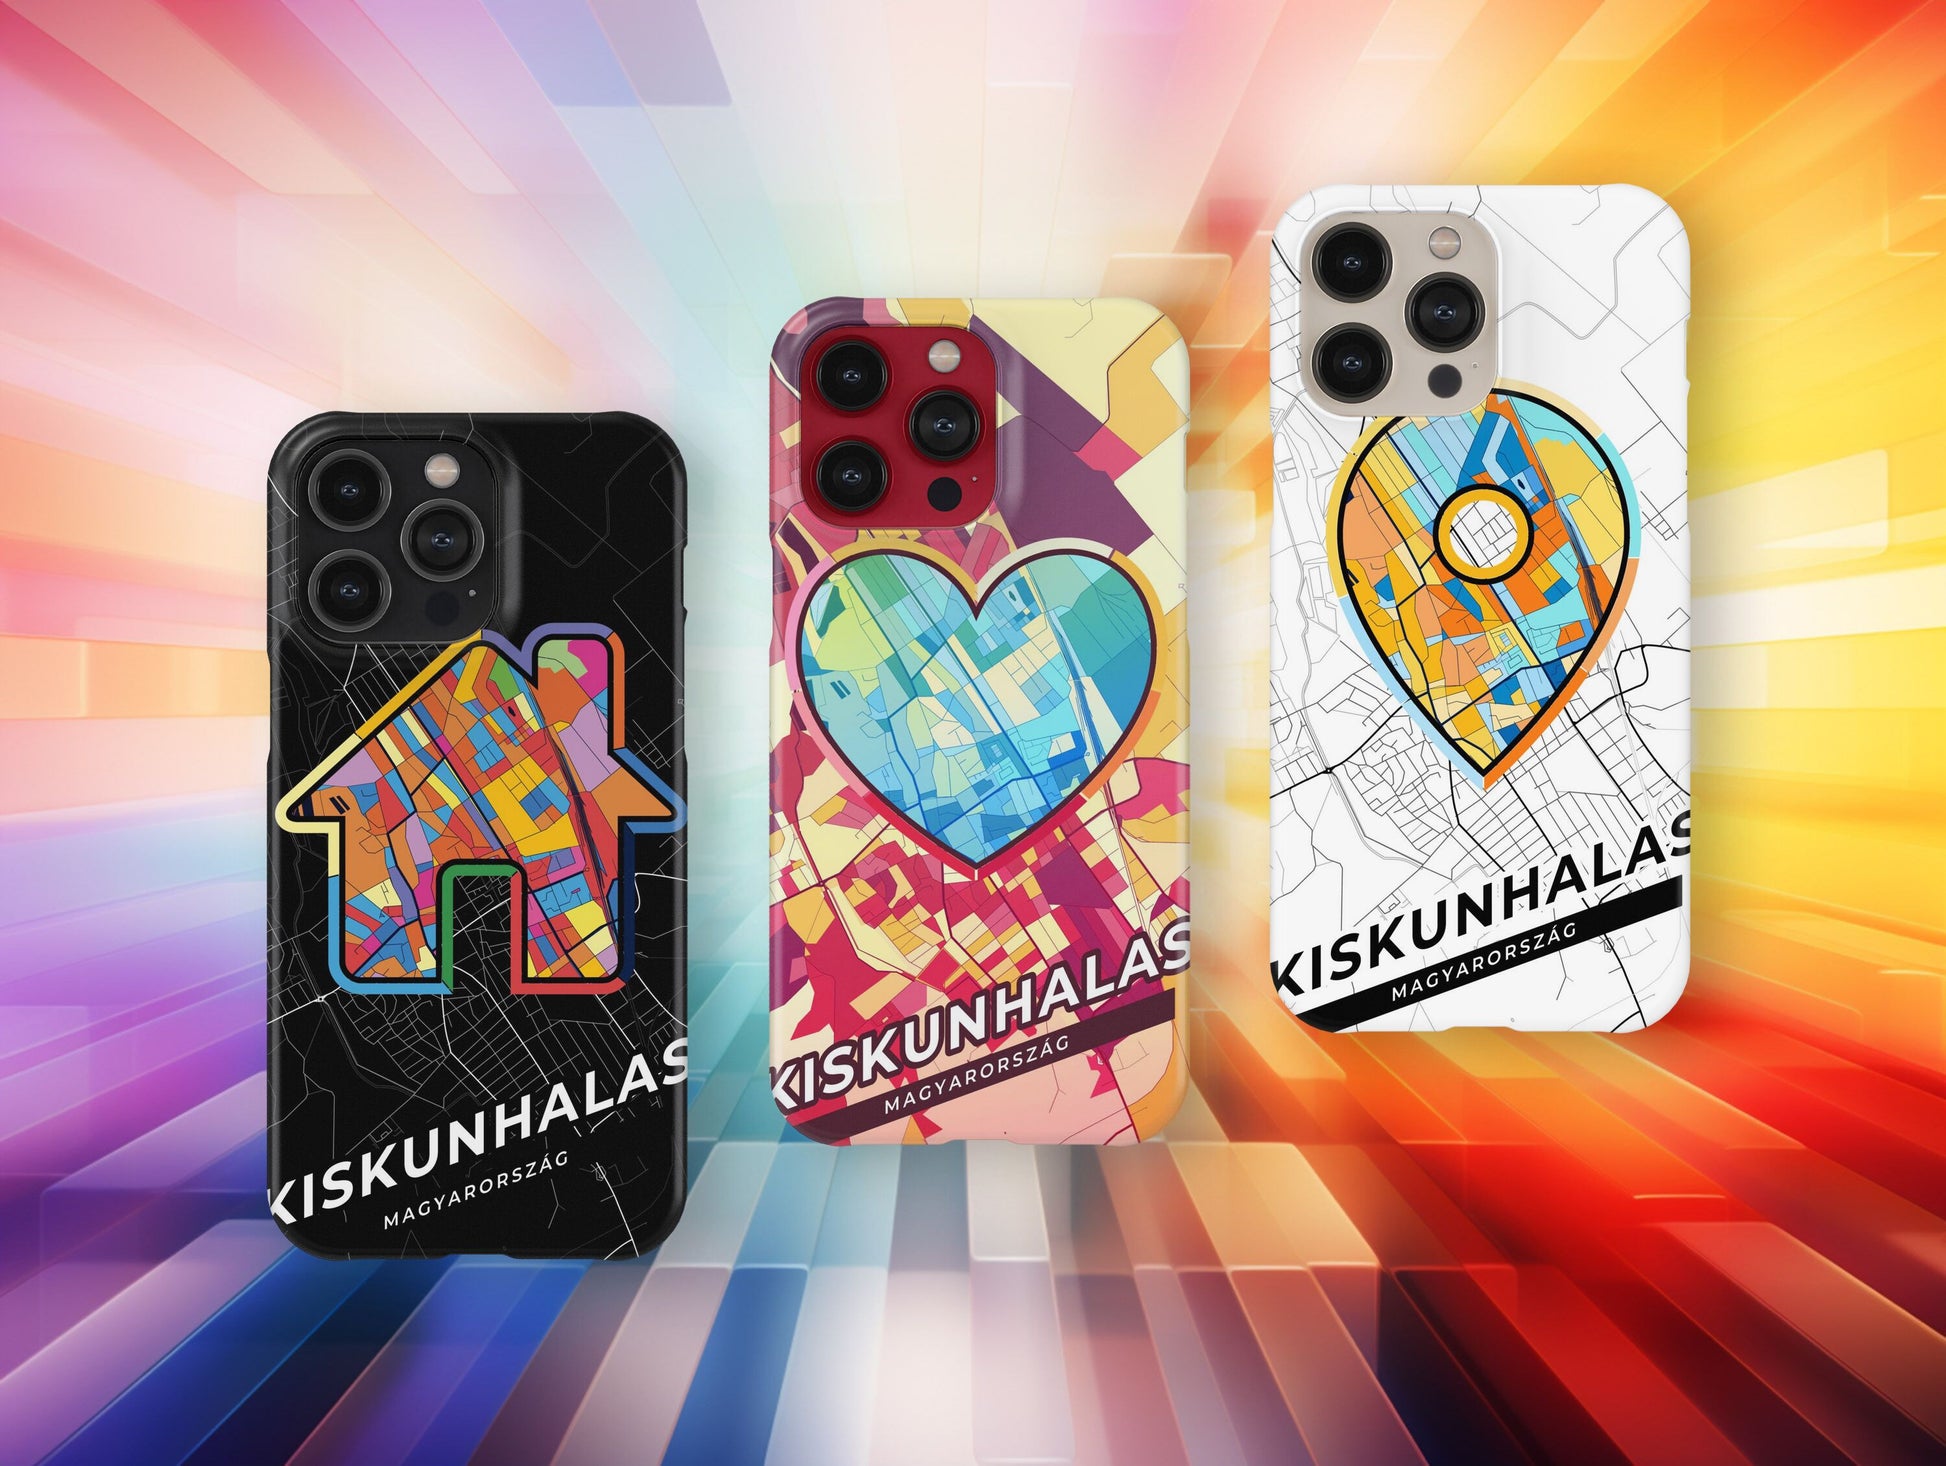 Kiskunhalas Hungary slim phone case with colorful icon. Birthday, wedding or housewarming gift. Couple match cases.